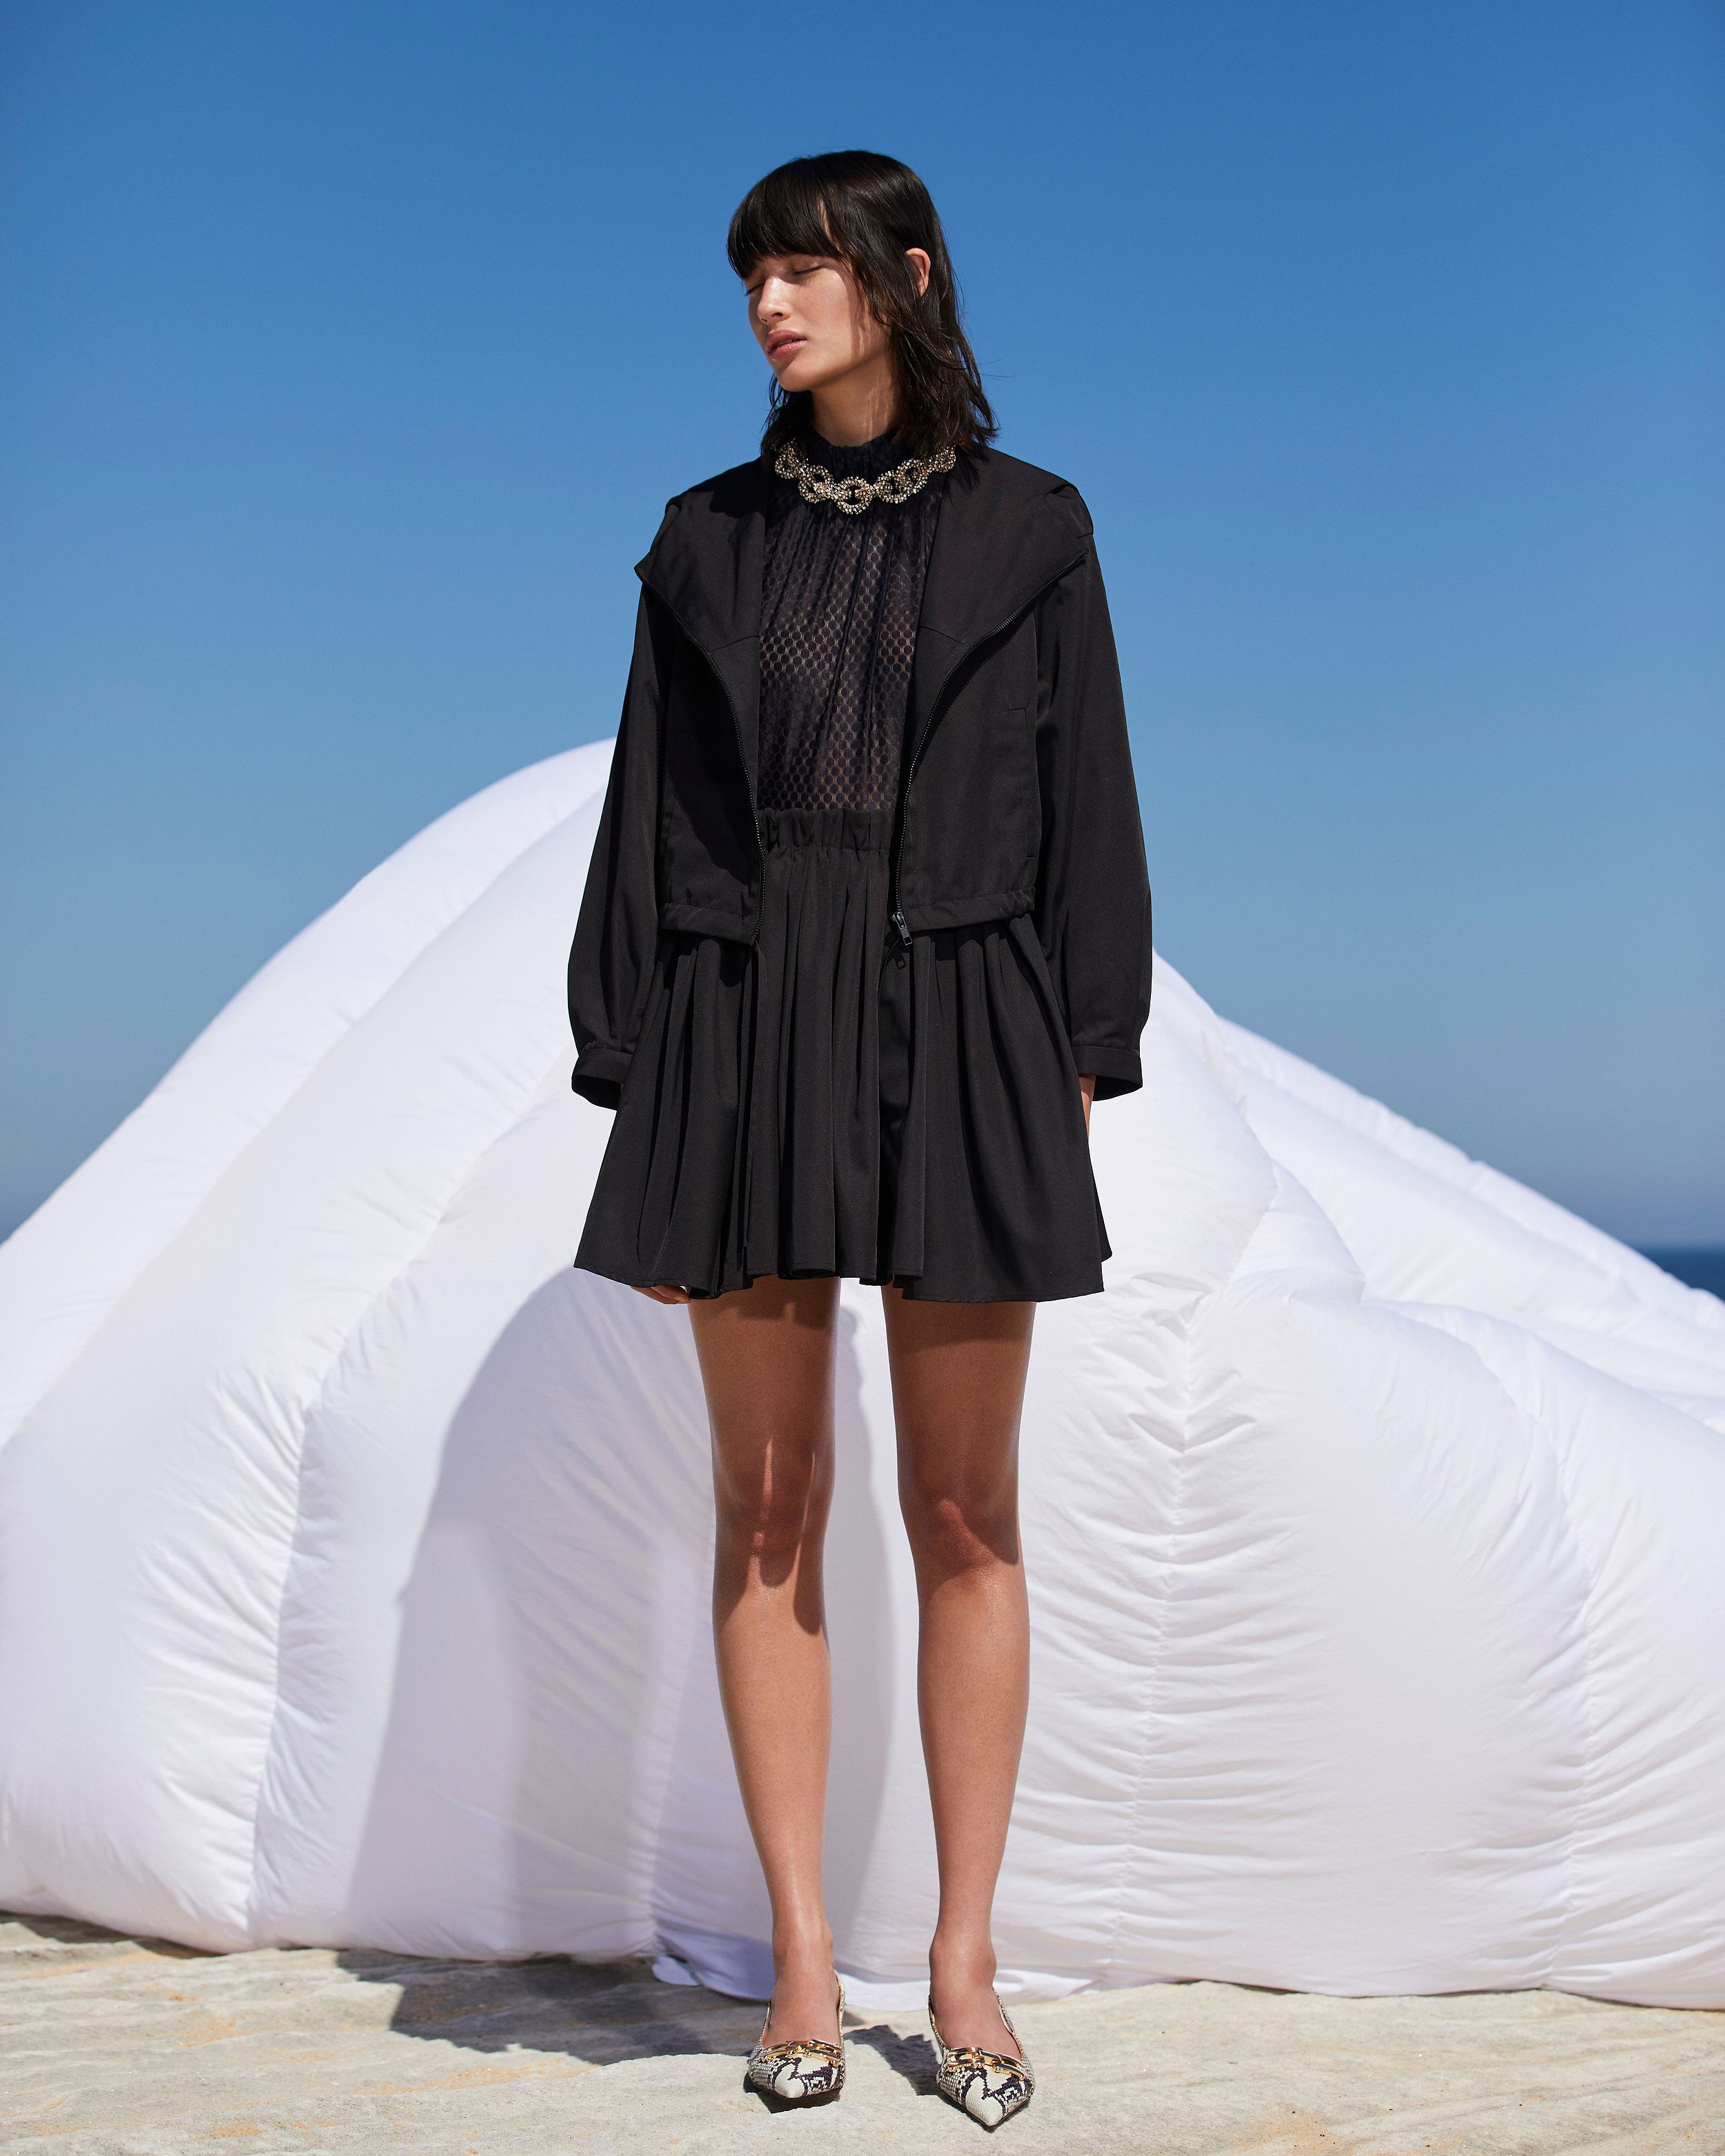 Model standing in front of a white inflatable structure wearing a black top, jacket and skirt